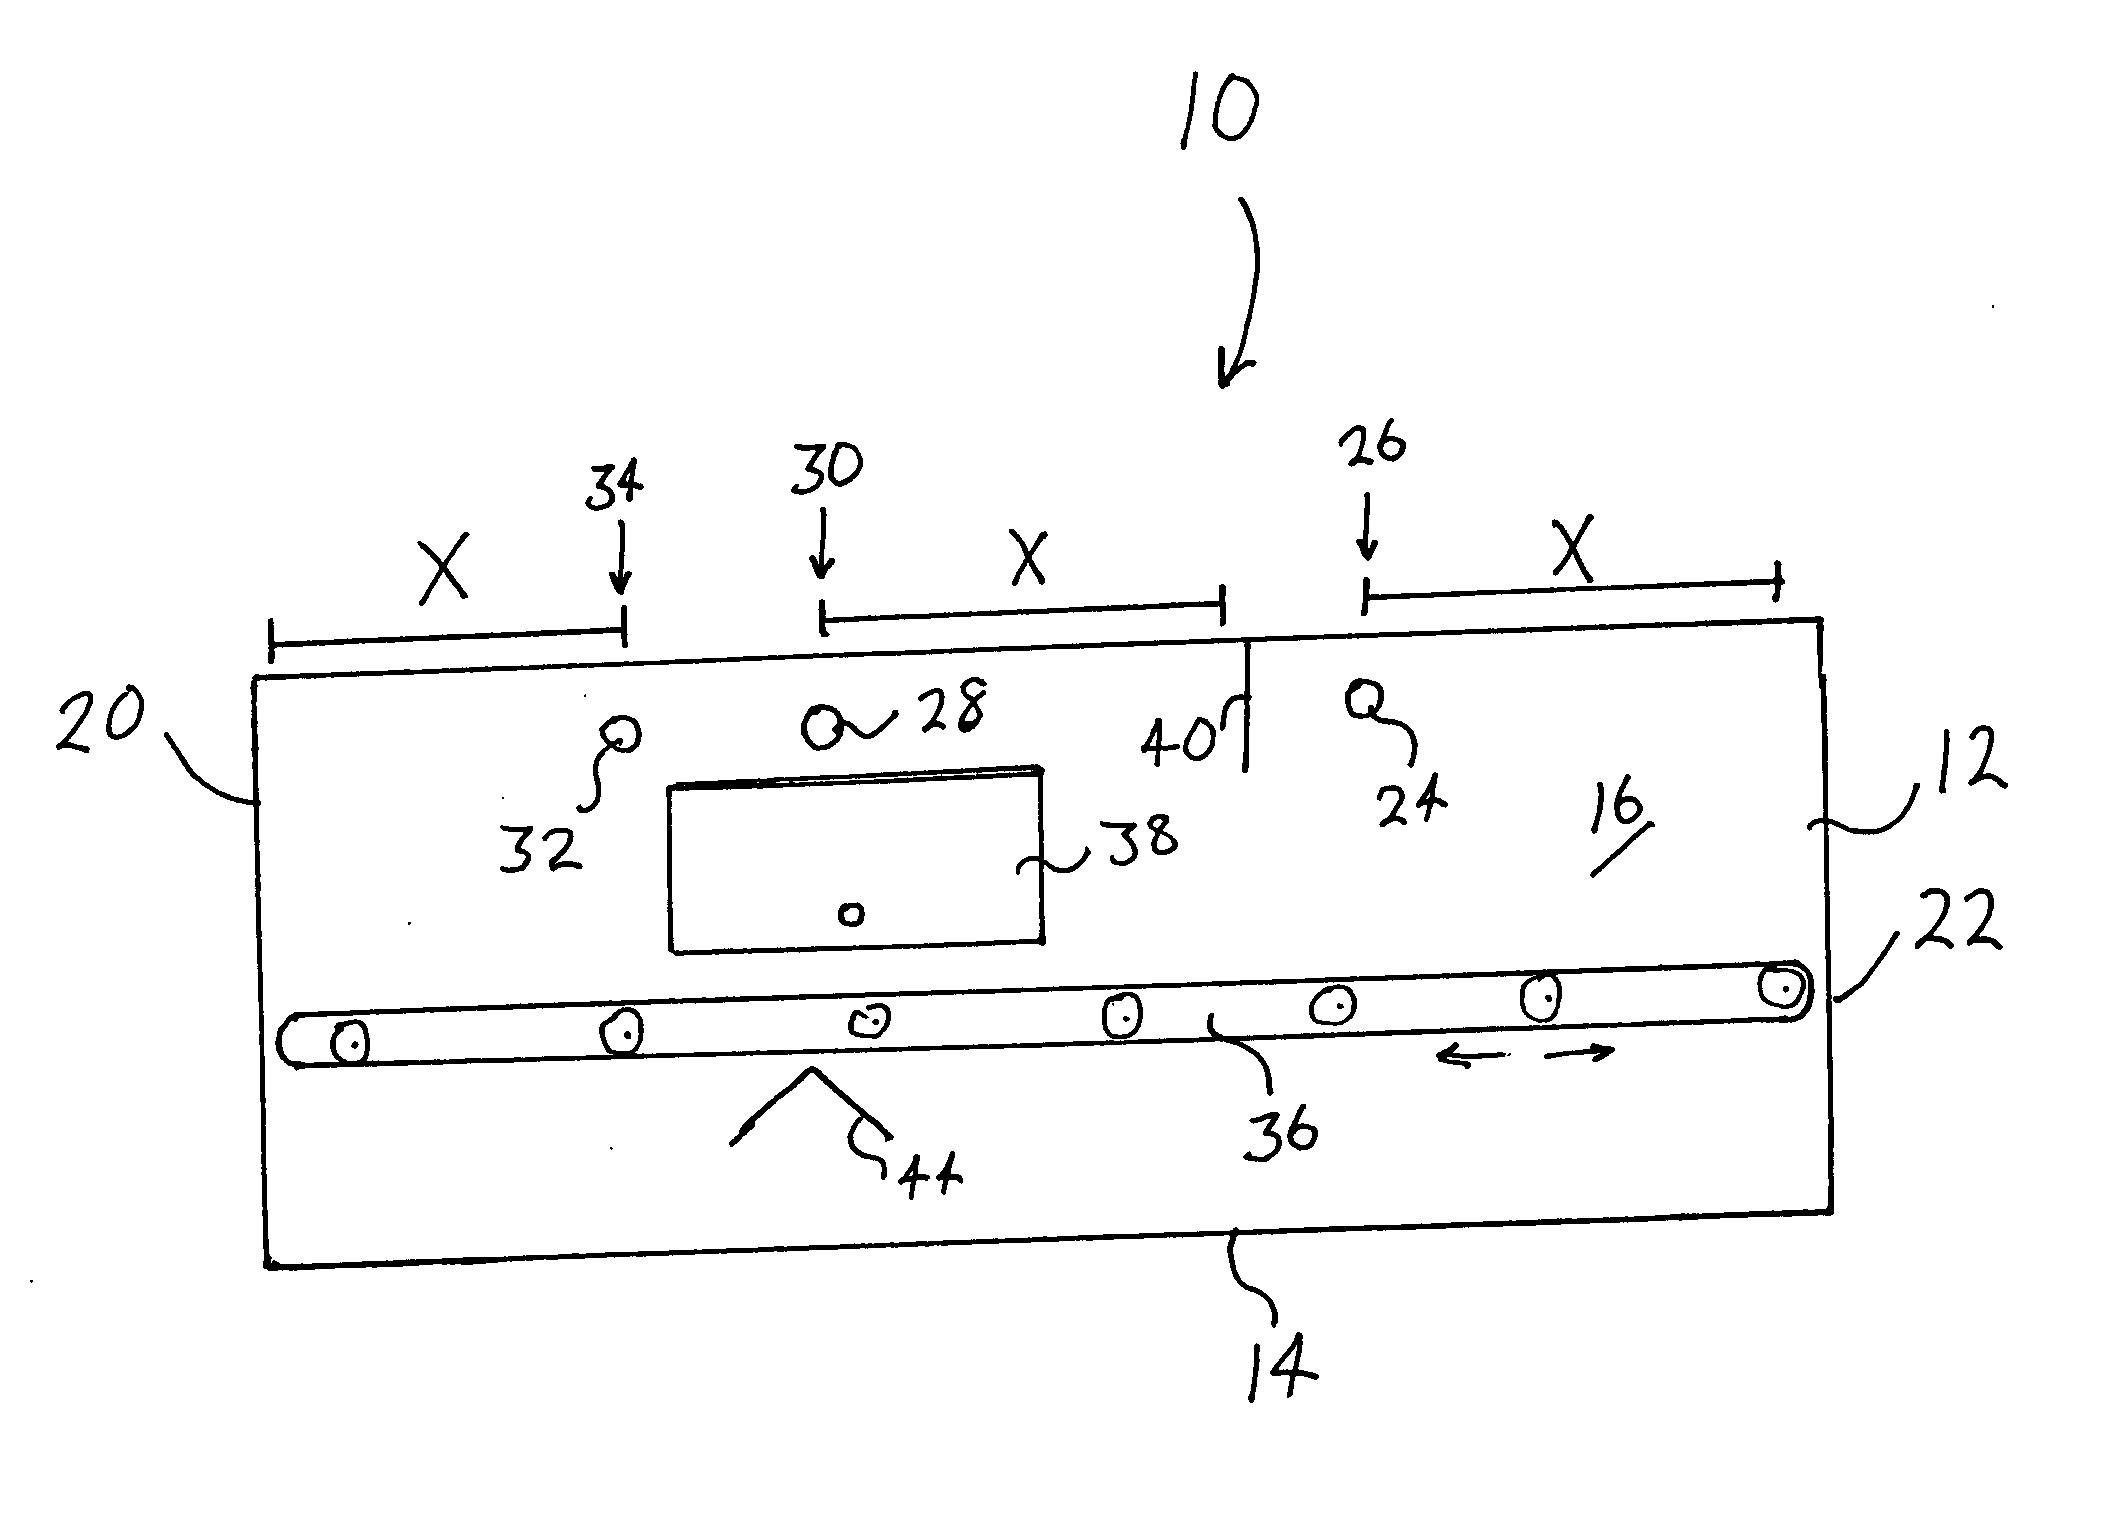 Apparatus and method for cleaning printed circuit boards